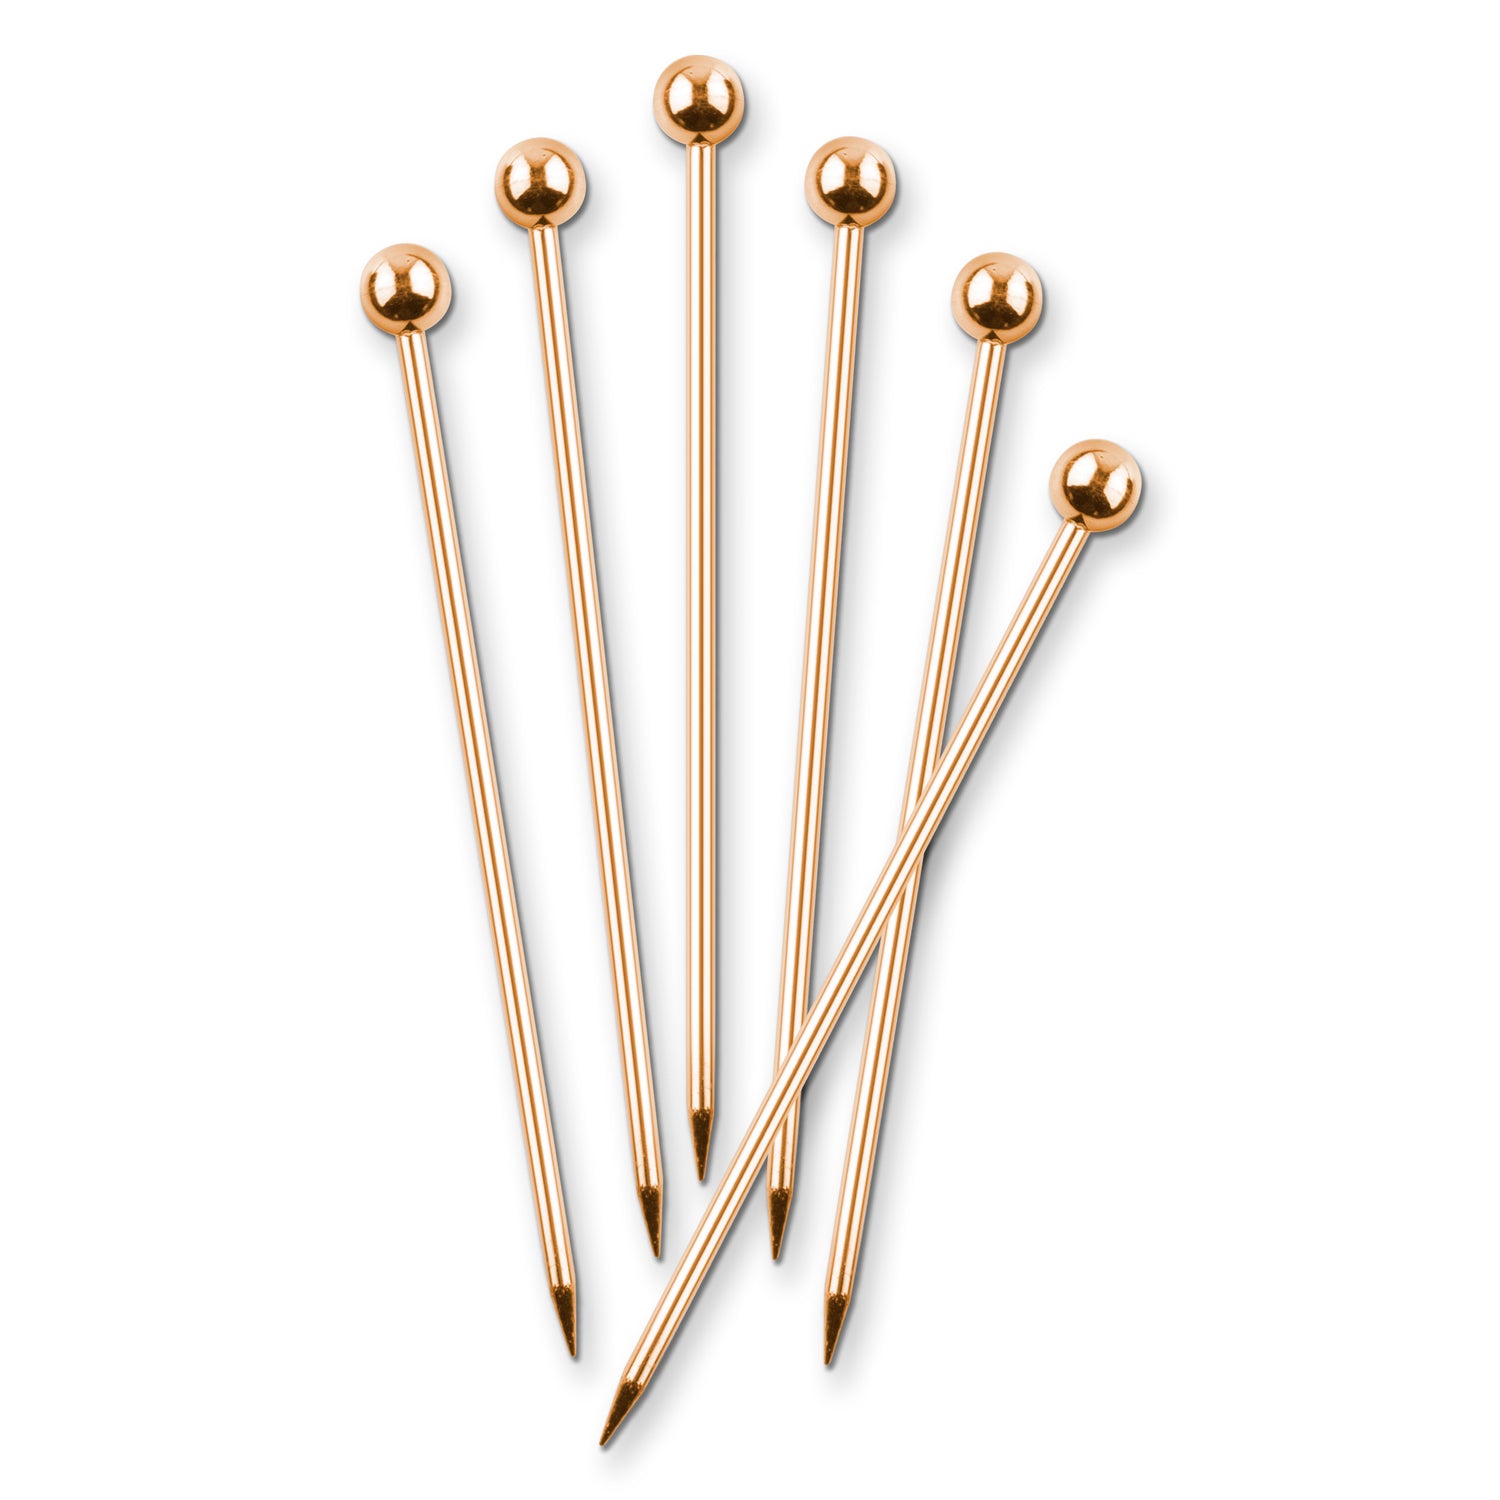 Stainless Steel Cocktail Picks - Copper Finish - Set of 6